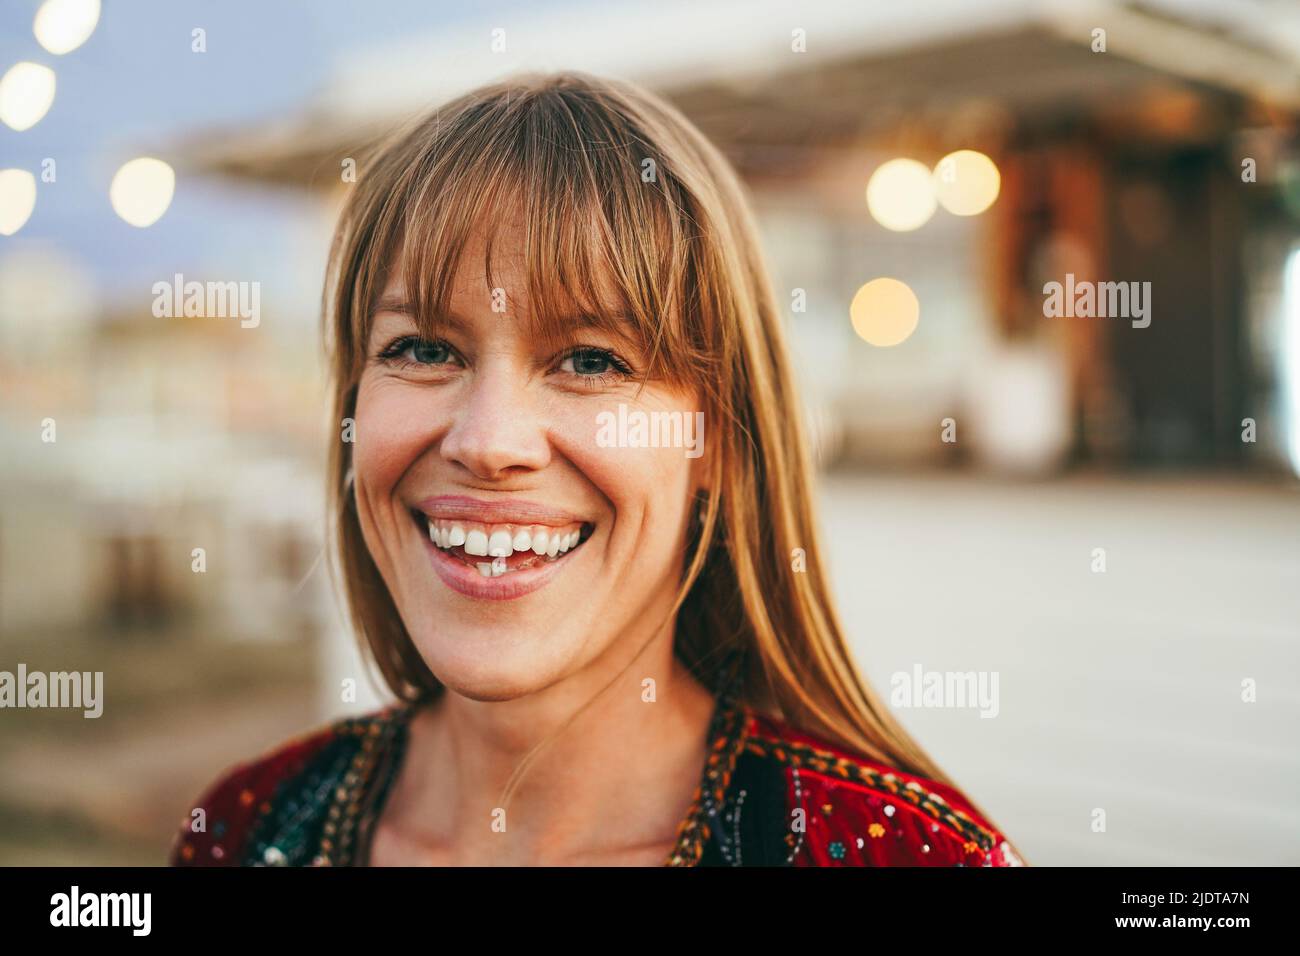 Young girl smiling on camera with beach bar on background - Focus on face Stock Photo